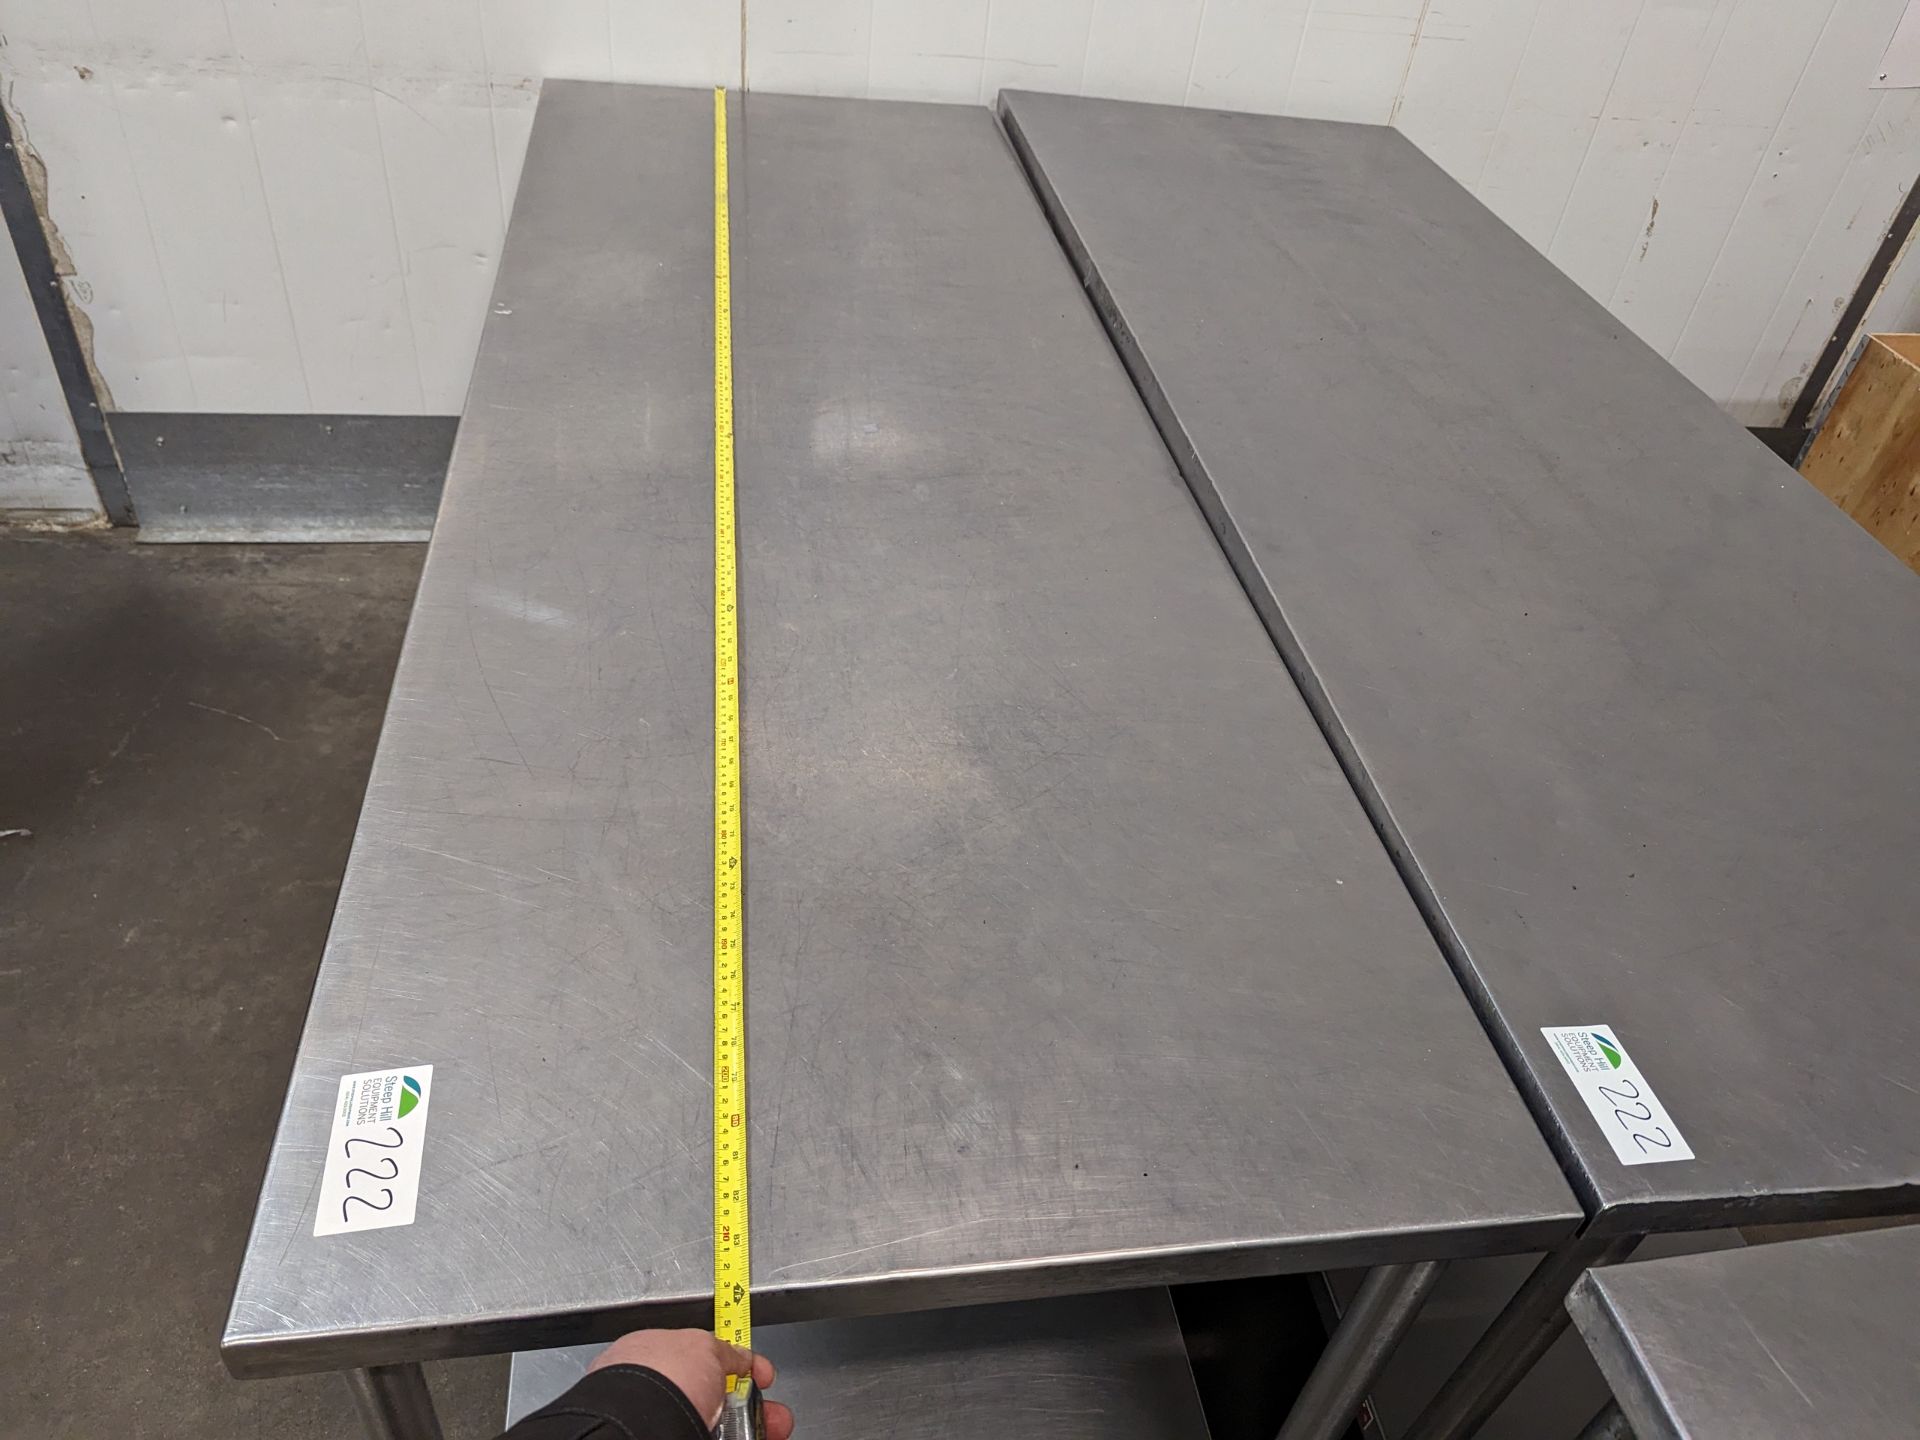 Lot of 2 7ft Long SS Tables, Dimensions LxWxH: 84x30x36 each - Image 4 of 5